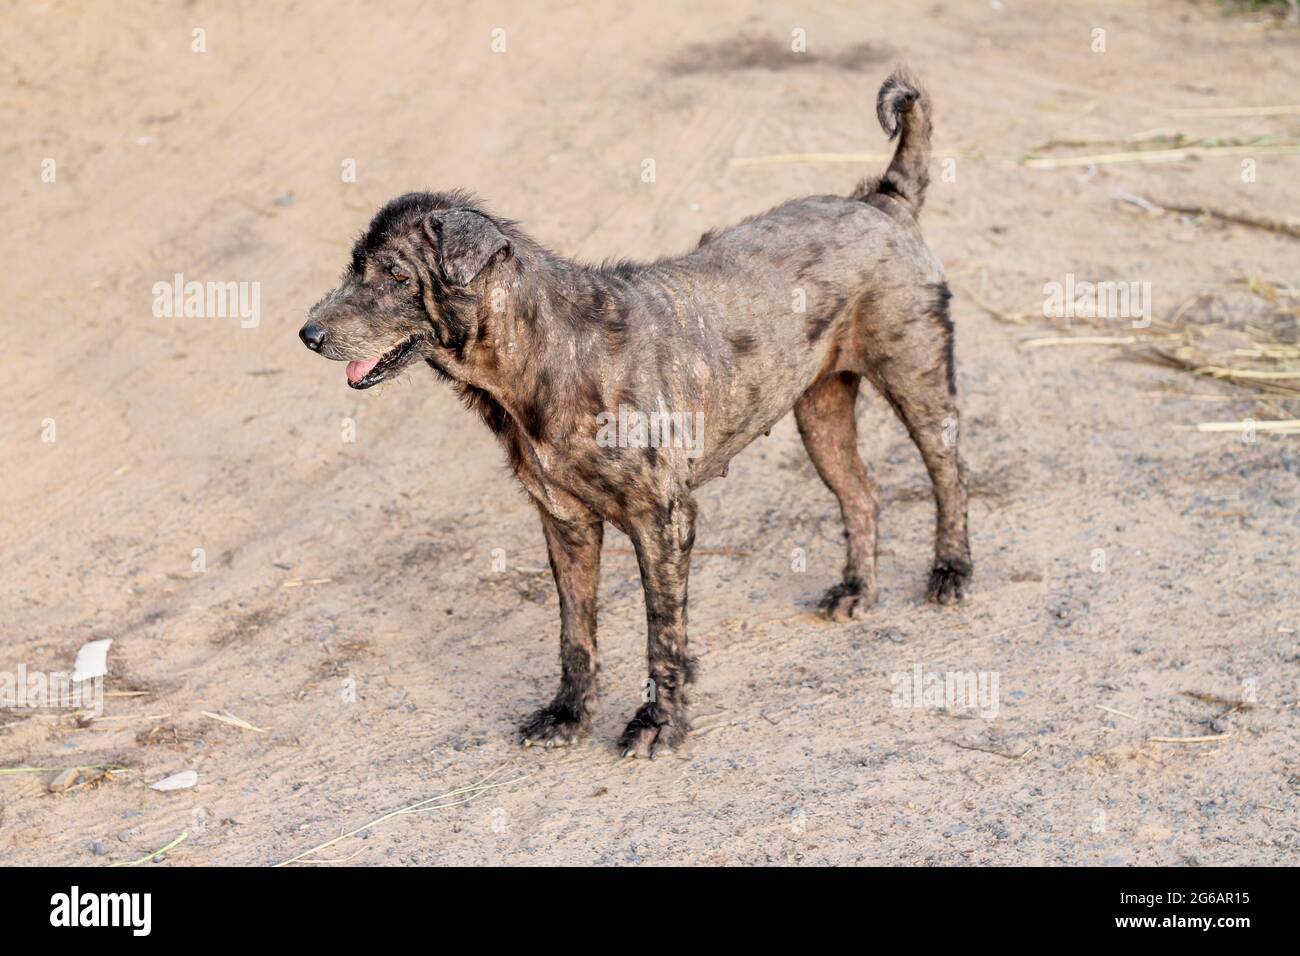 The black dog with leprosy was standing on the ground. Stock Photo